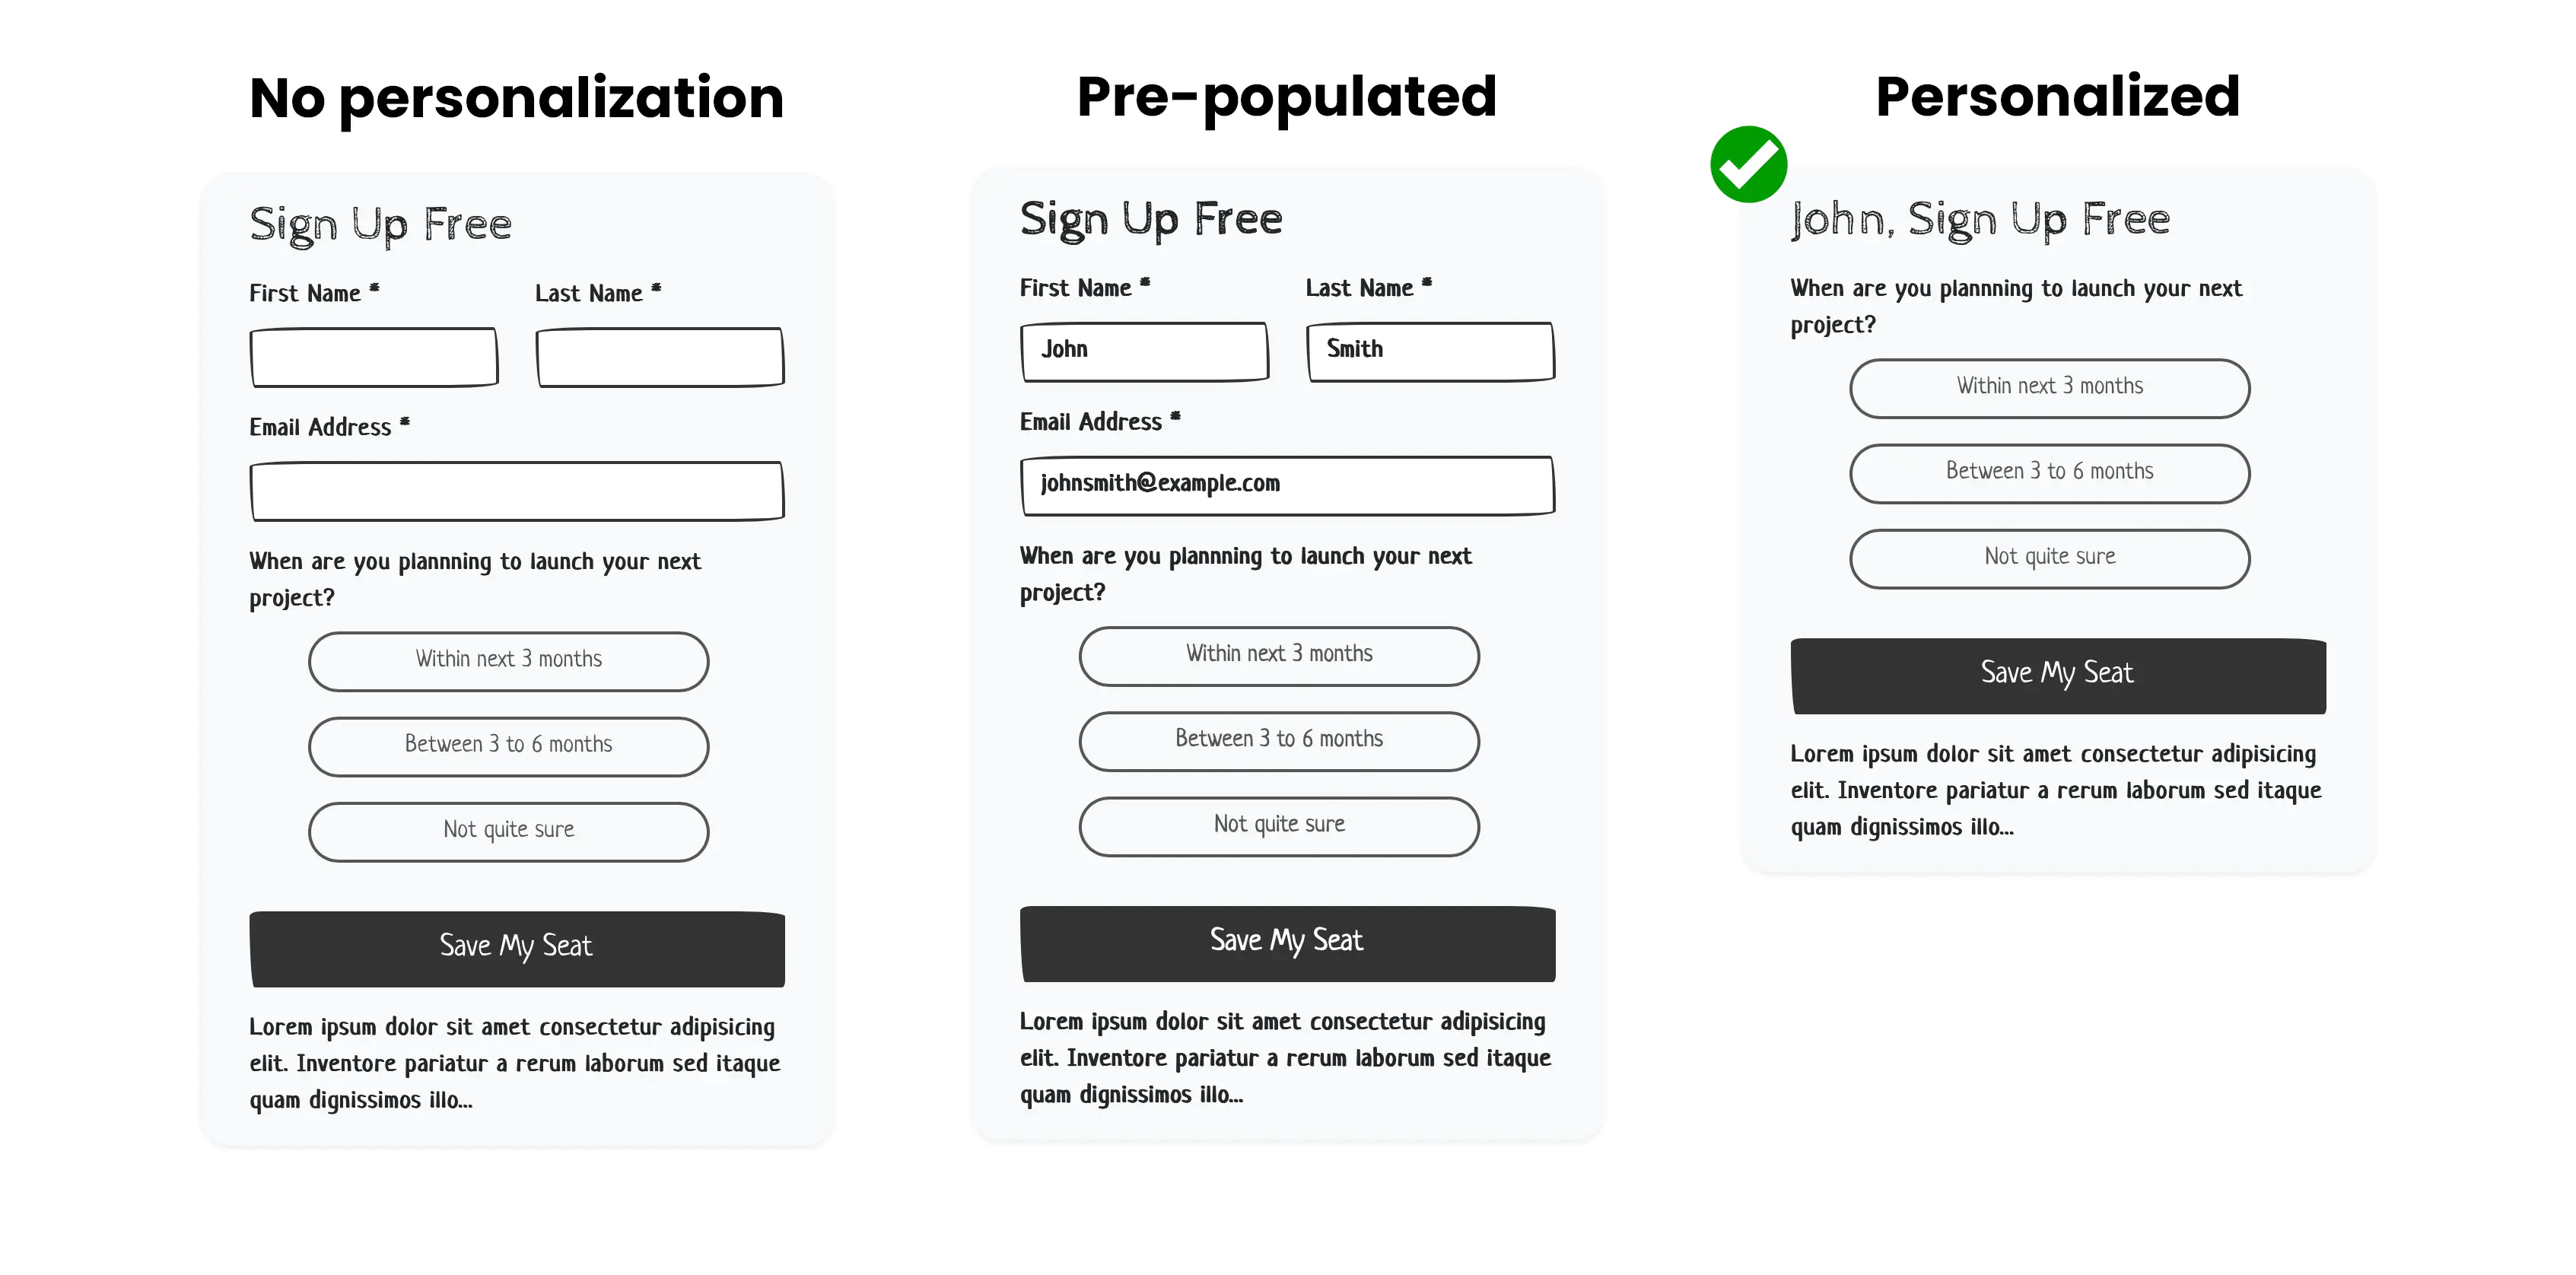 A personalized form improves your webinar conversion rates